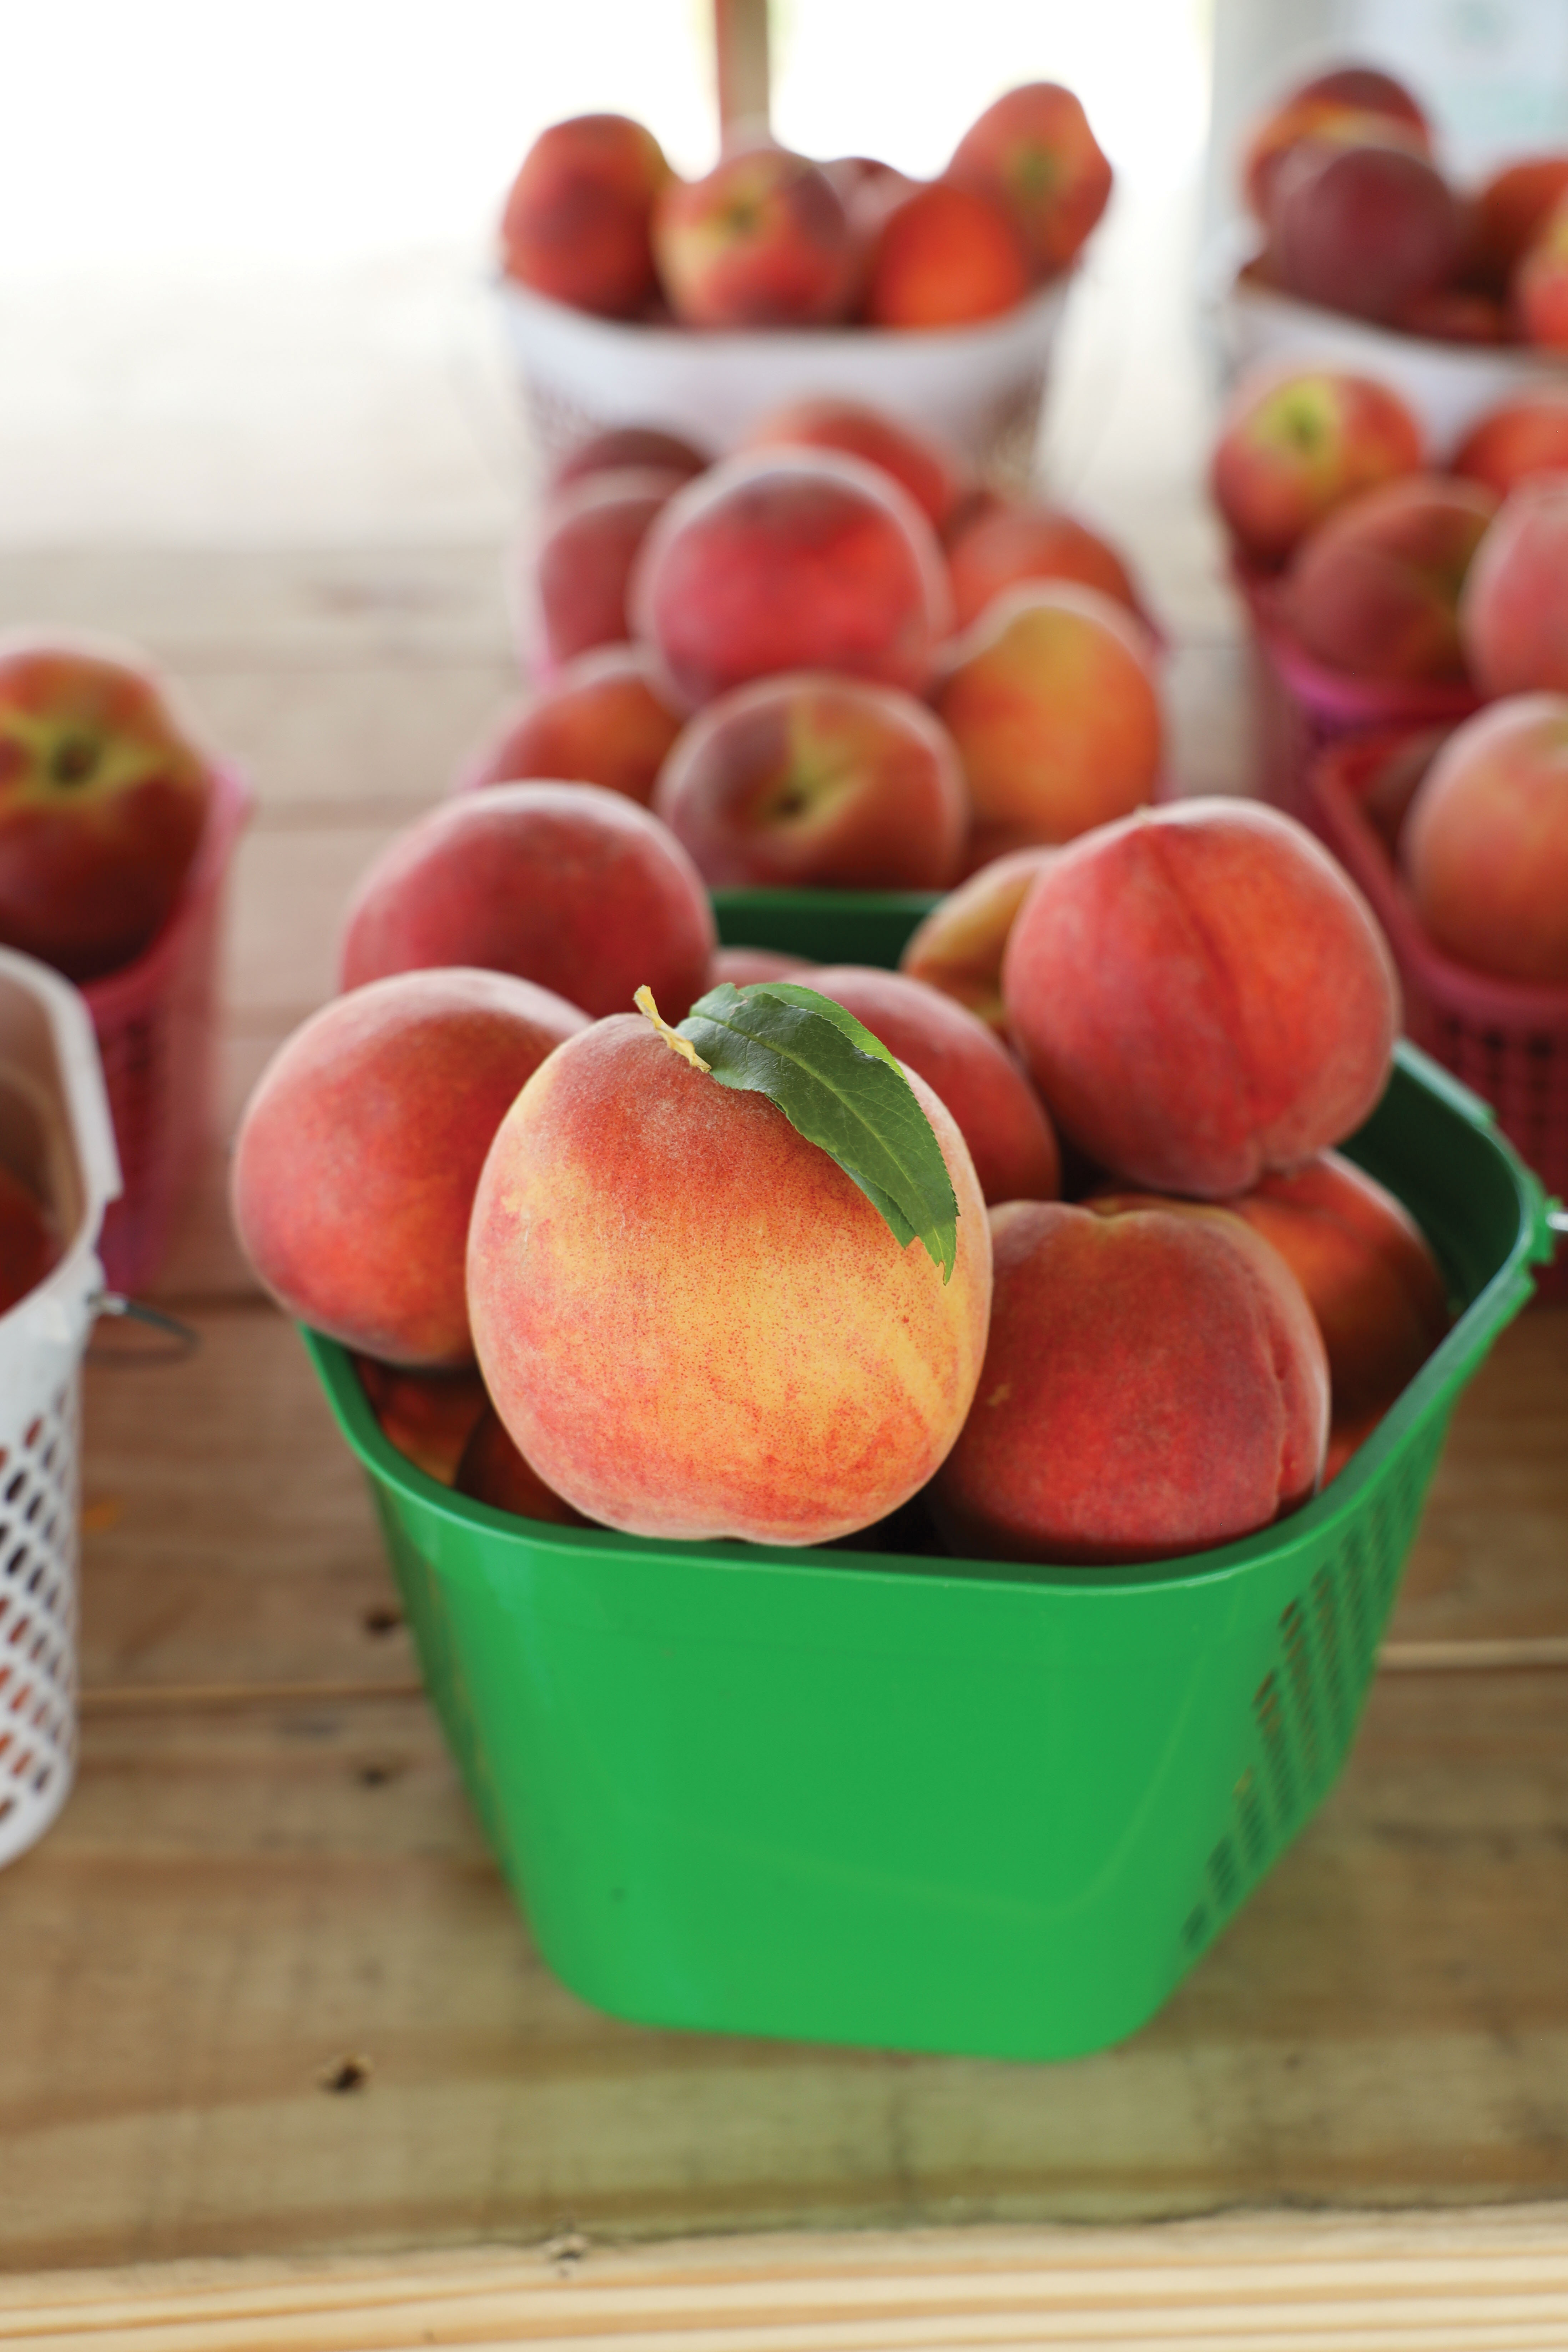 Find Shuler peaches at the farmstand in Ridgeville and at the Mount Pleasant and downtown farmers markets.